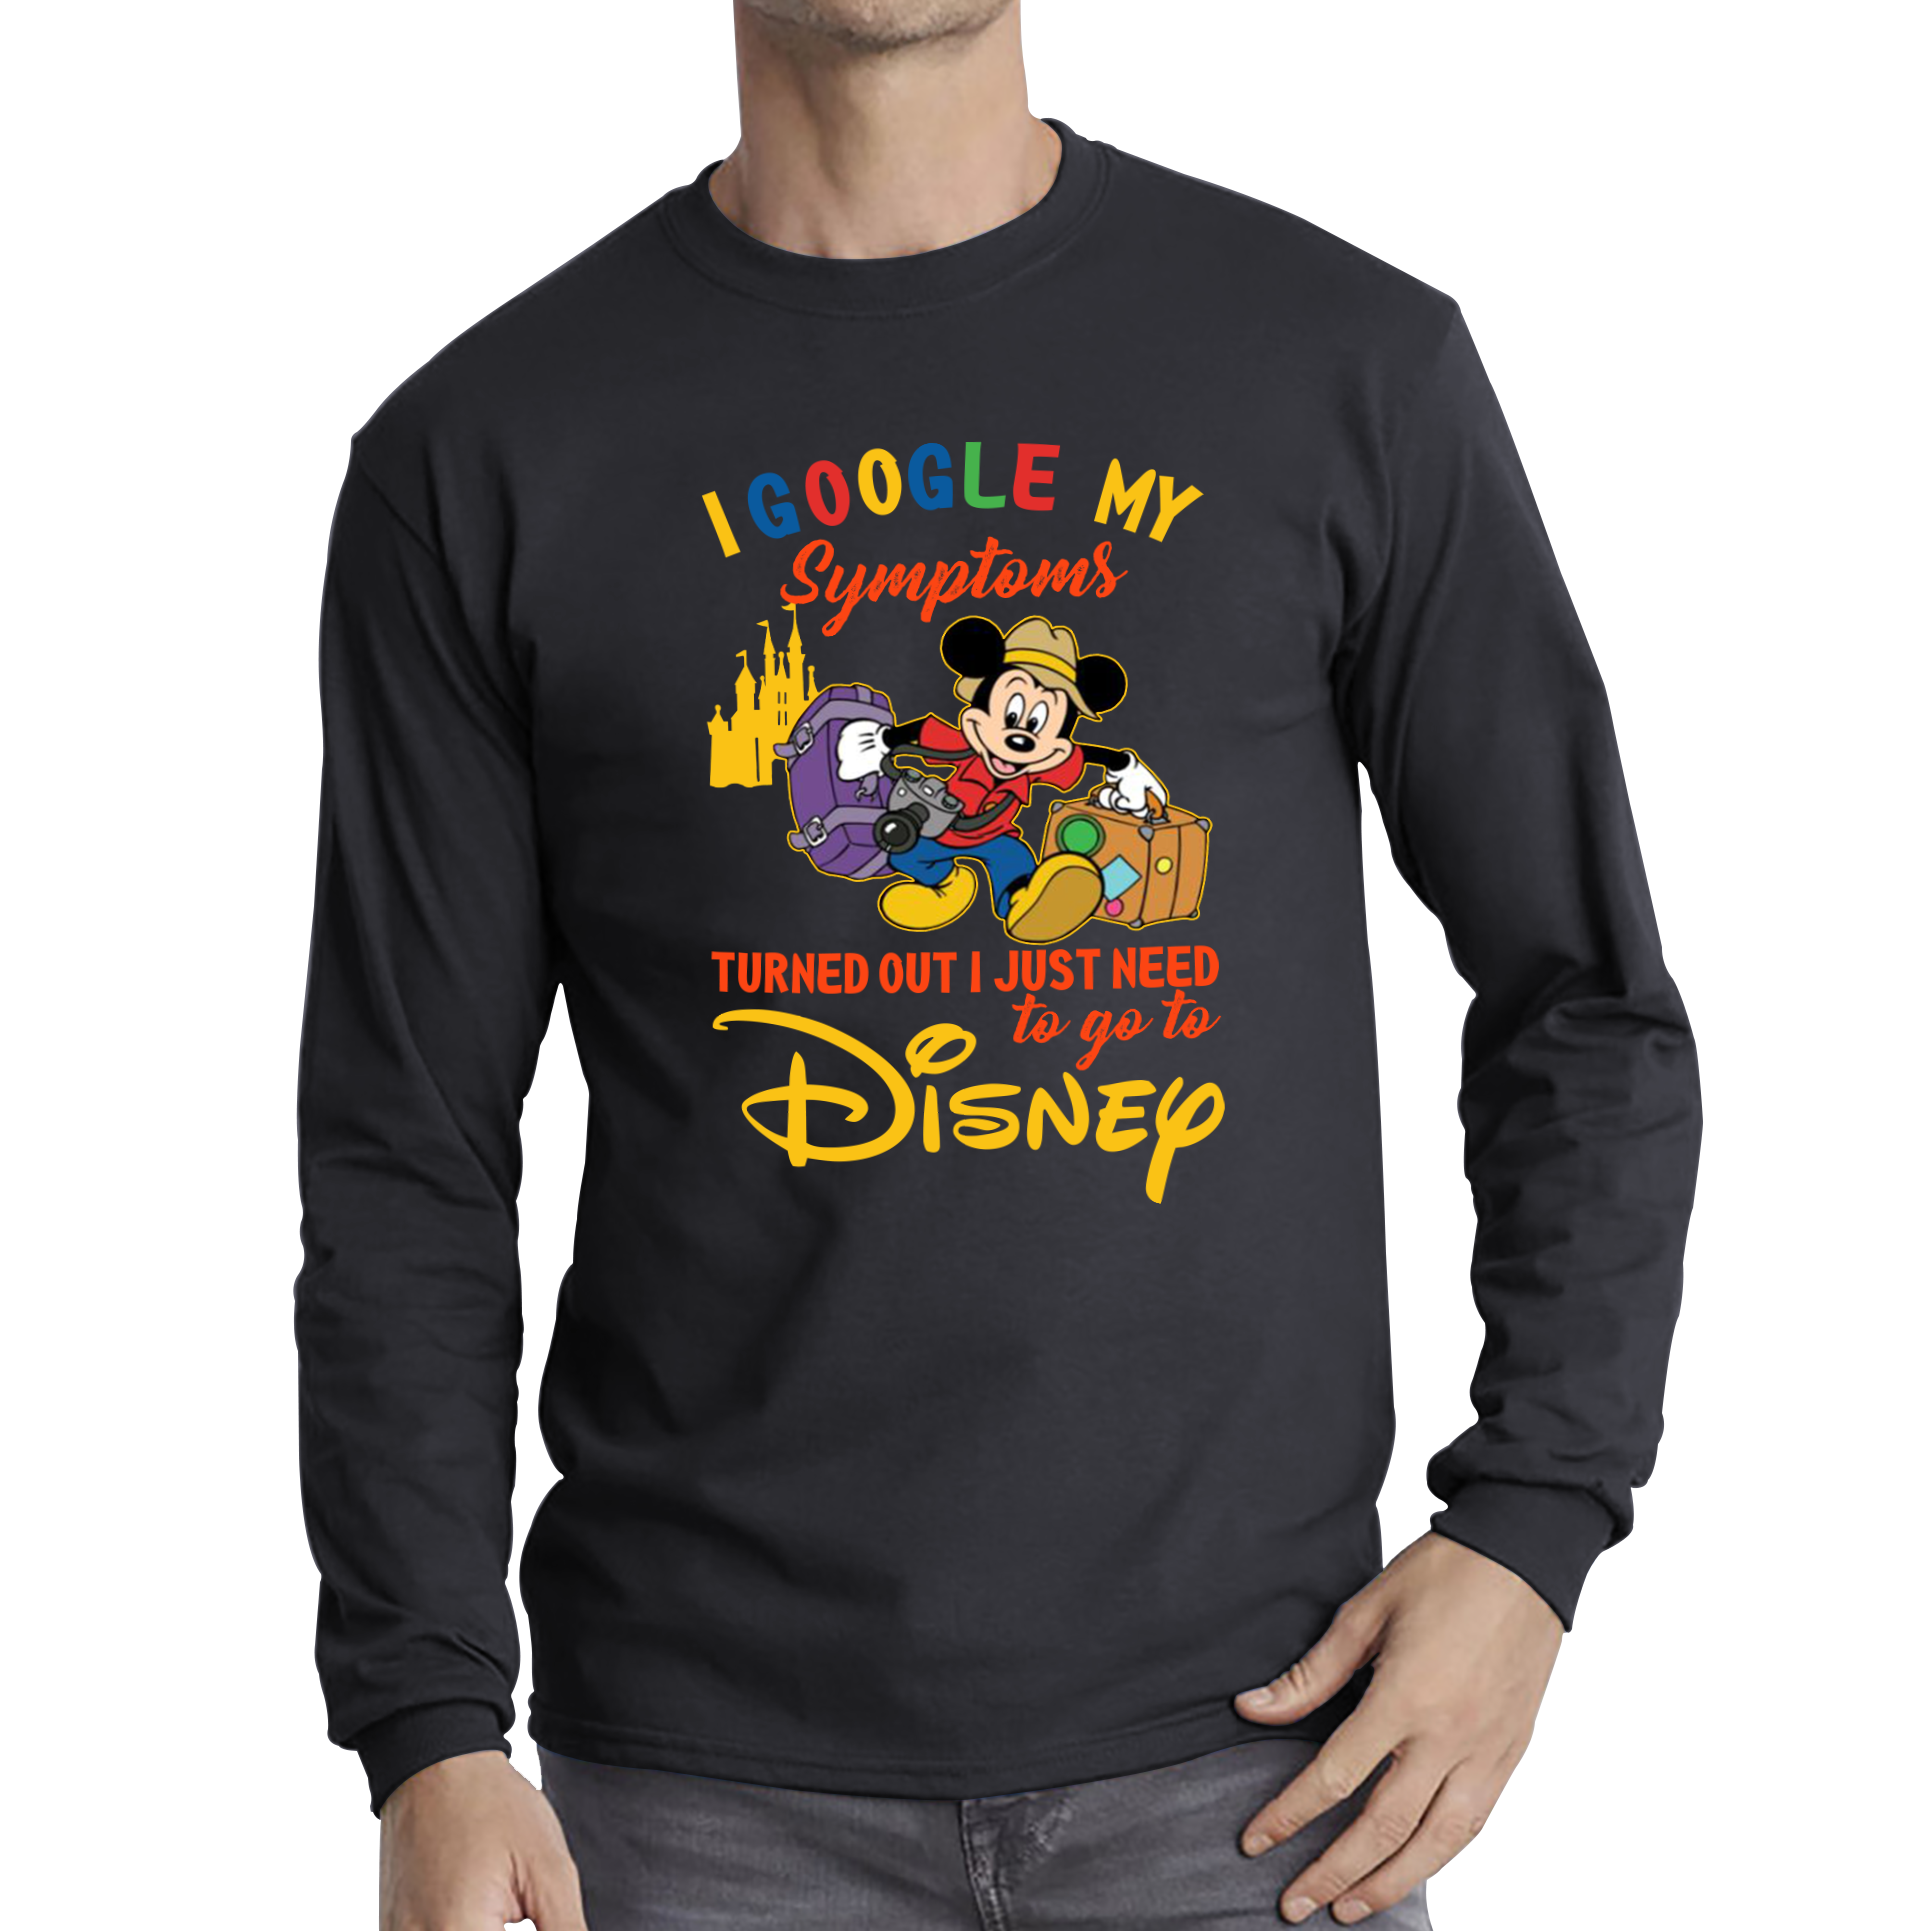 I Google My Symptoms Turned Out I Just Need To Go To Disney Adult Long Sleeve T Shirt